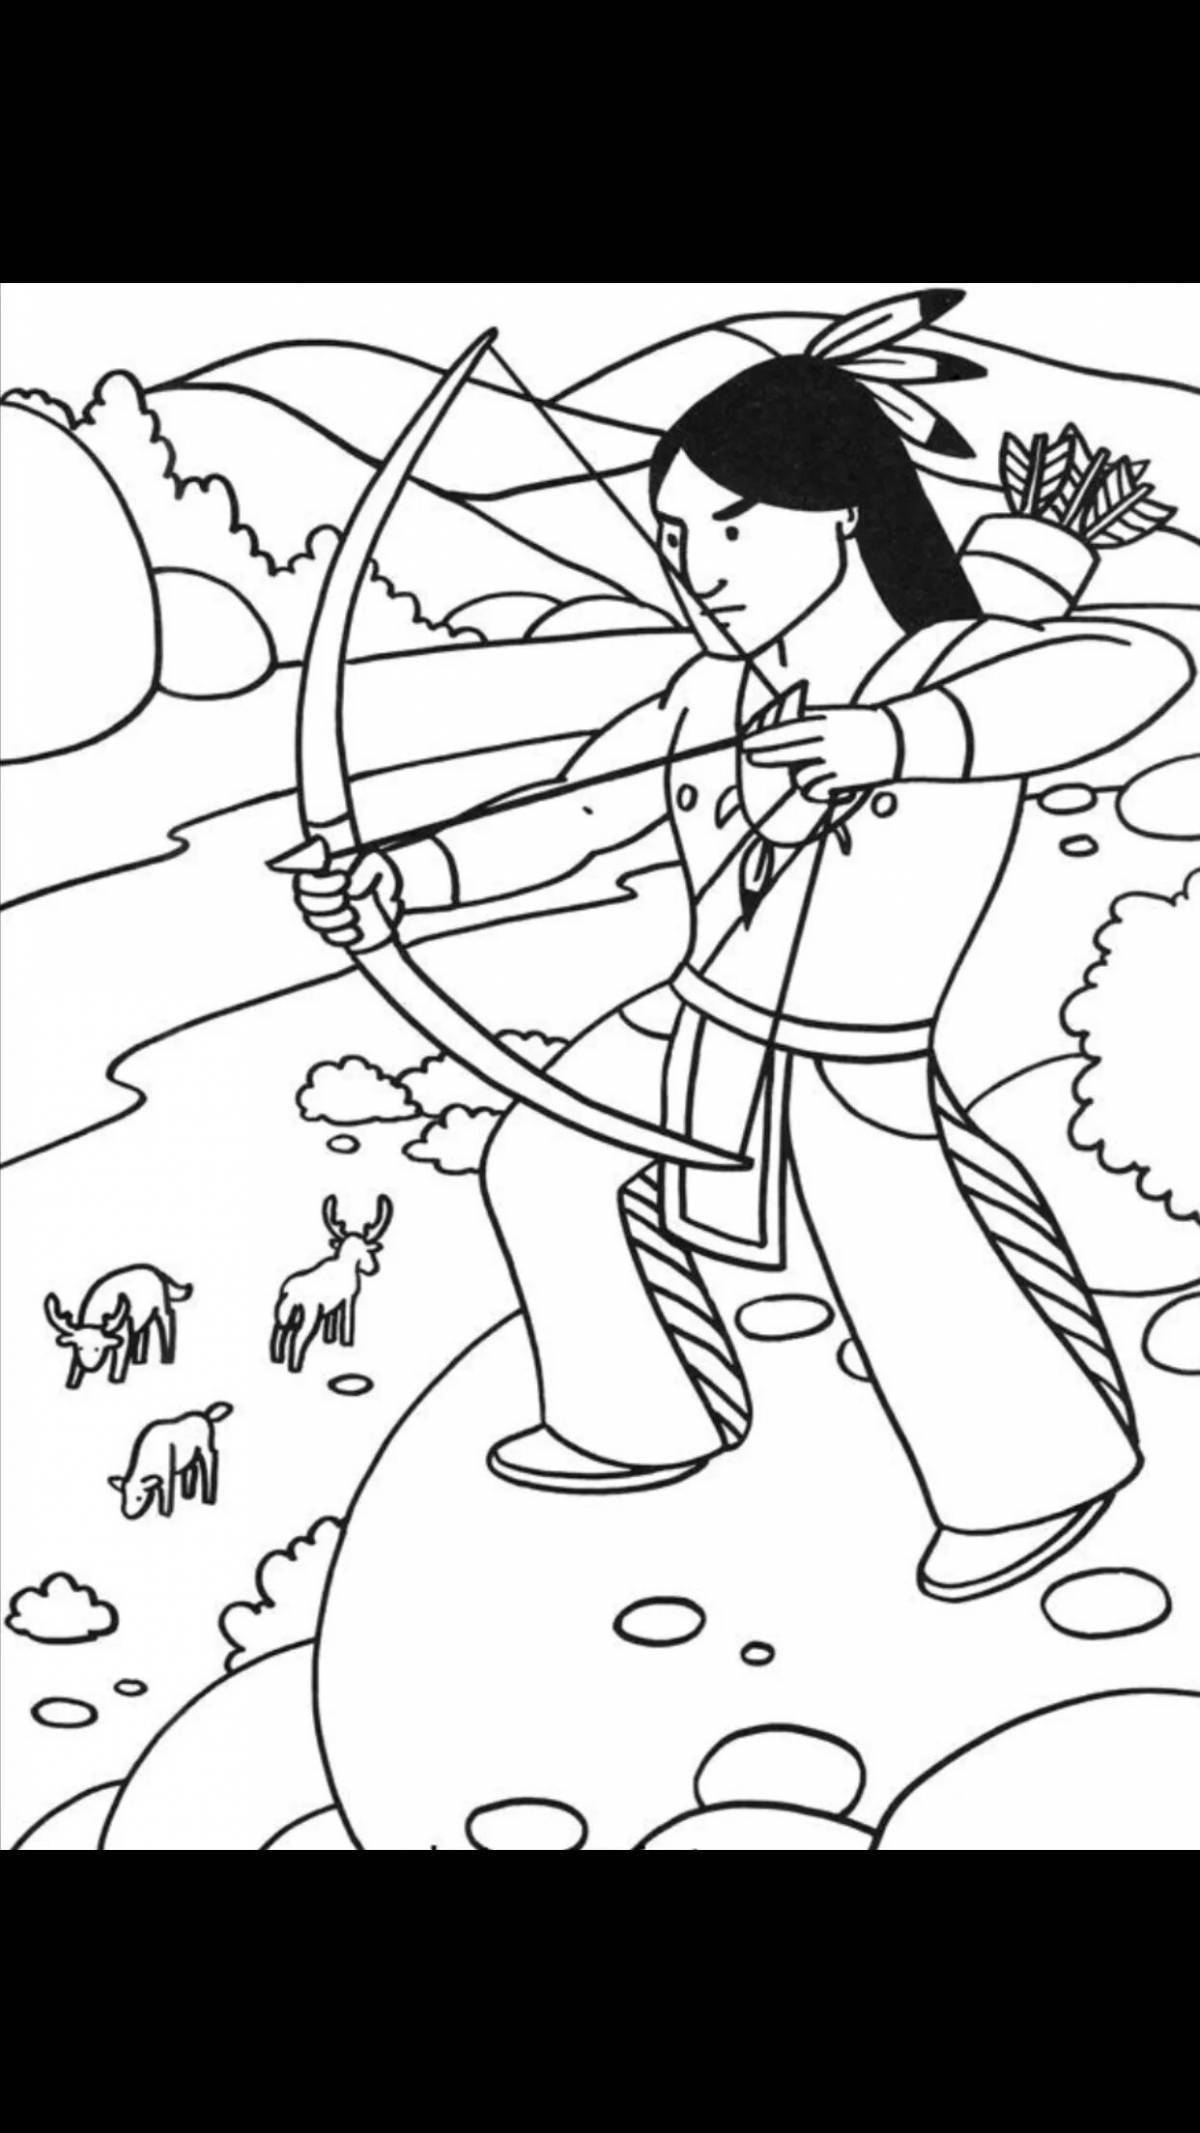 Funny Indian coloring book for kids